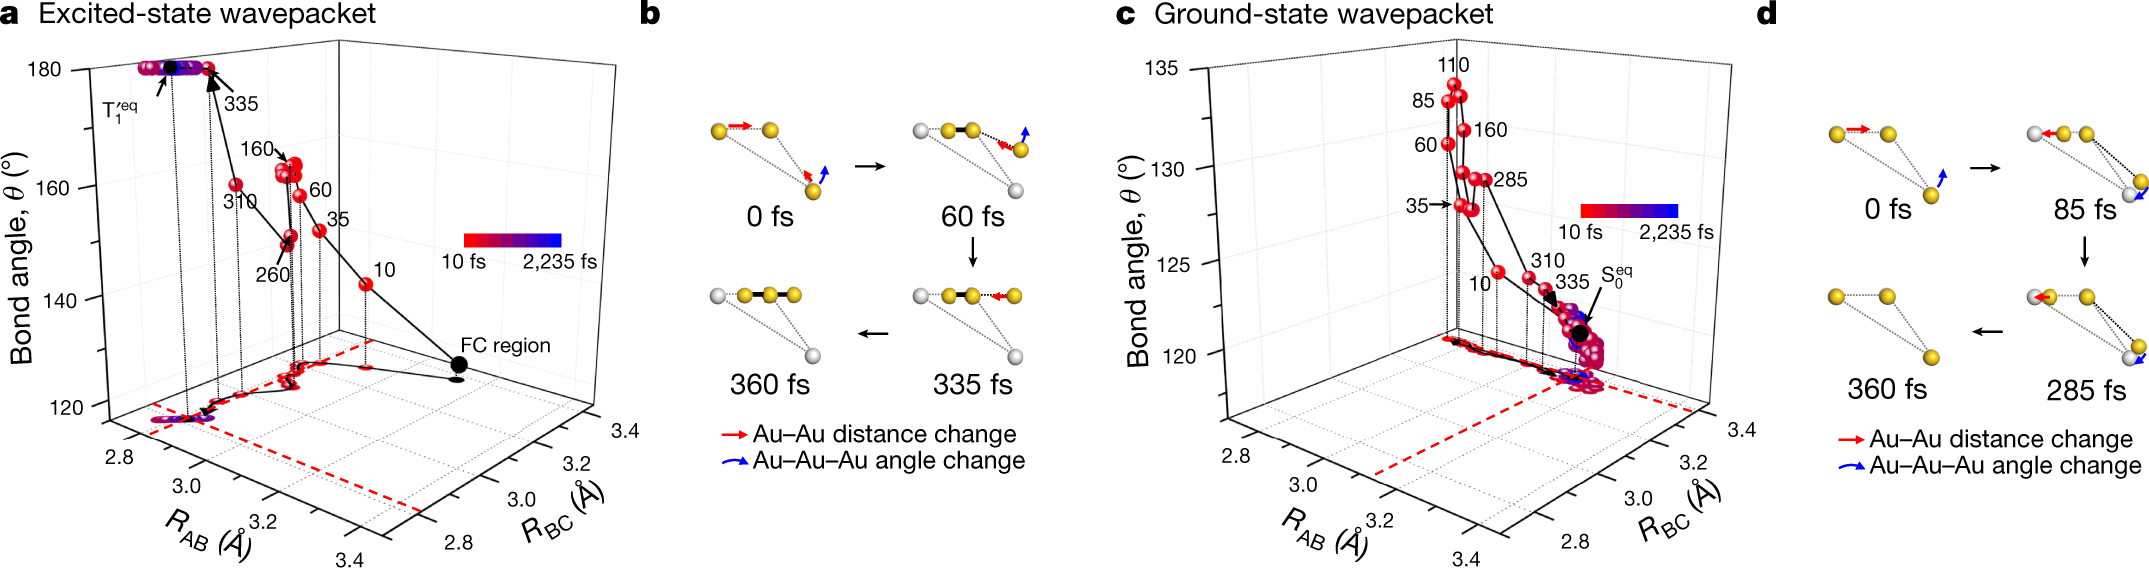  Figure 2. Trajectories of the excited-state and ground-state wavepackets determined from TRXL data.